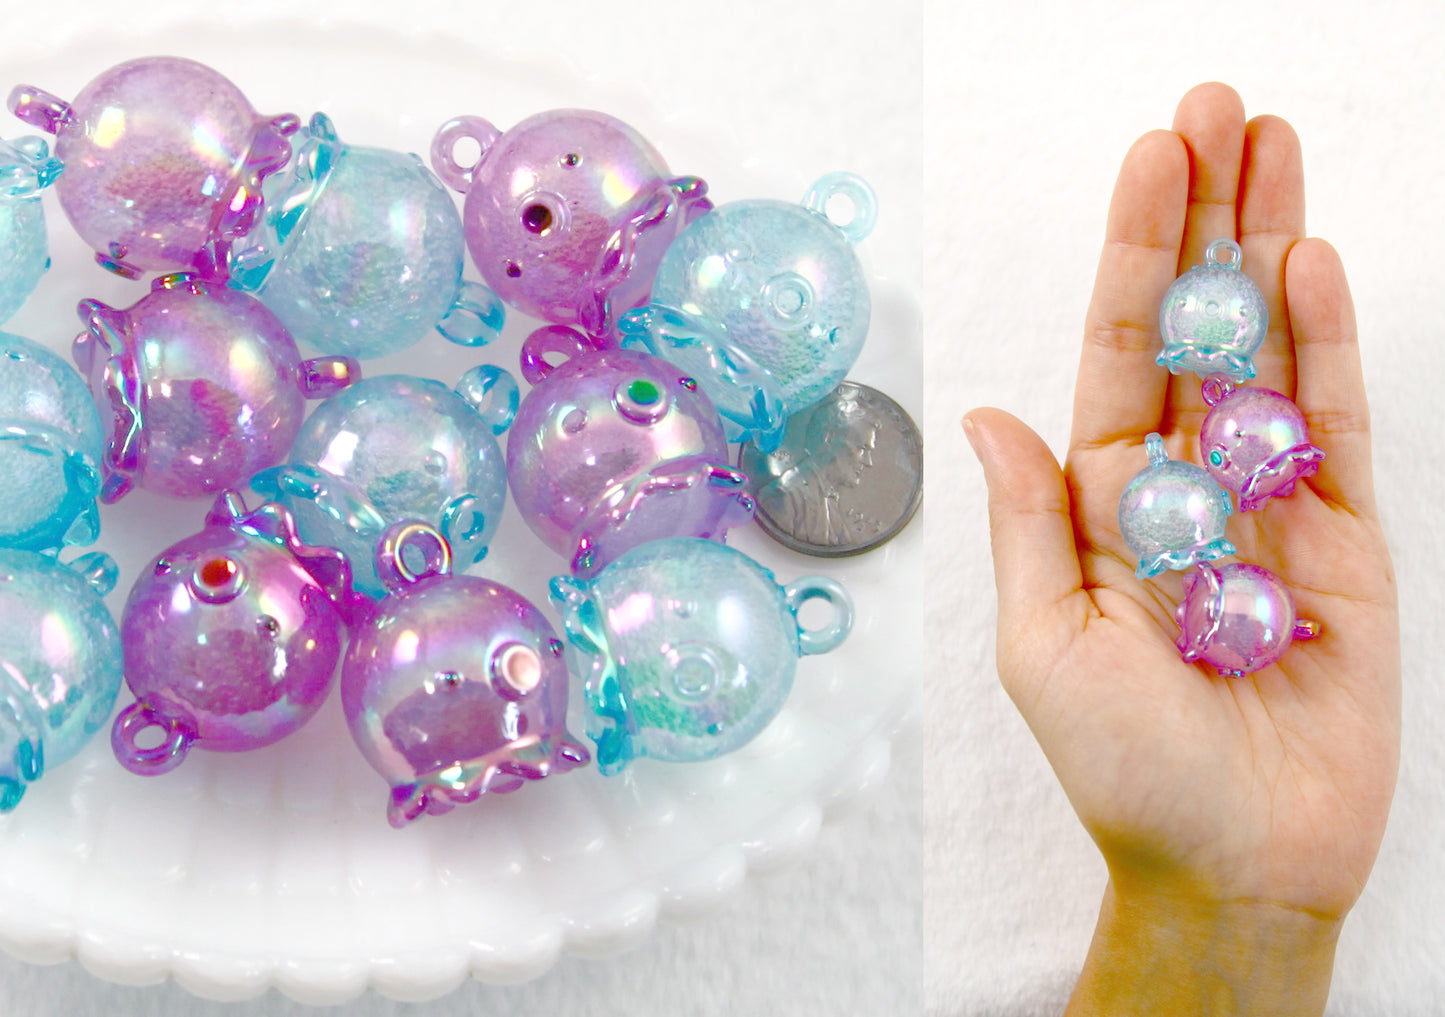 Octopus Charms - 30mm Chunky Pastel Octopus Resin Charms or Pendants - 4 pc set